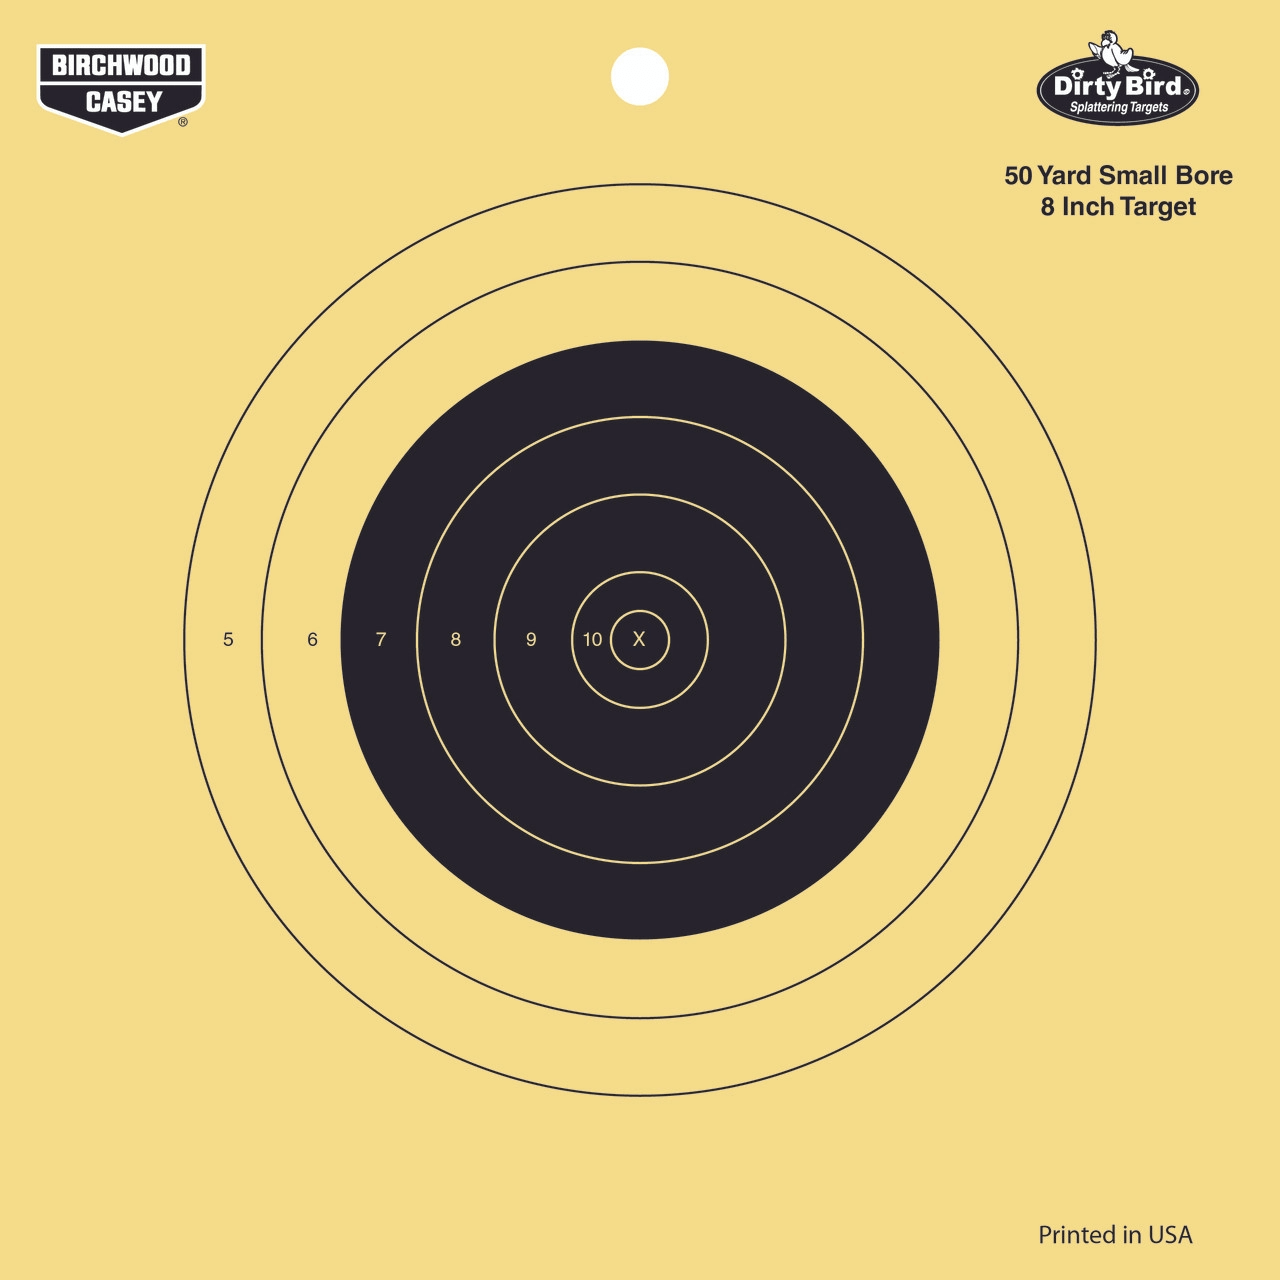 Birchwood Casey Dirty Bird 8 Inch 50 Yard Small Bore Reactive Target - 25 Targets BC-35815 - Shooting Accessories